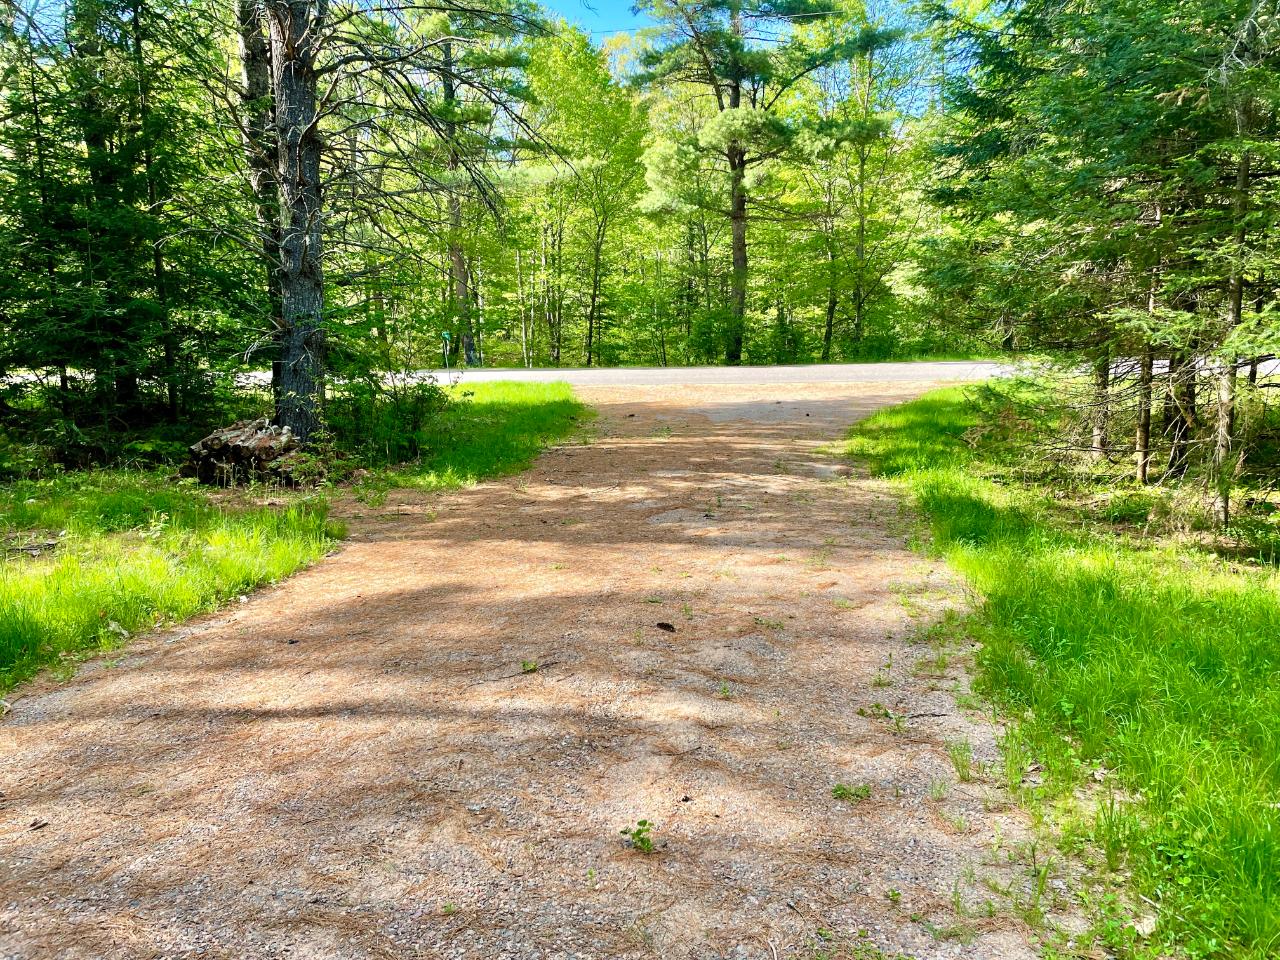 Great location for your home here. Nicely wooded 5 acres on Church Rd. Under 15 minutes to Eagle River yet it feels very much in the woods. The driveway is cut in. Power is there. Come and build your Northwoods home​​‌​​​​‌​​‌‌​‌‌‌​​‌‌​‌‌‌​​‌‌​‌‌‌ here!